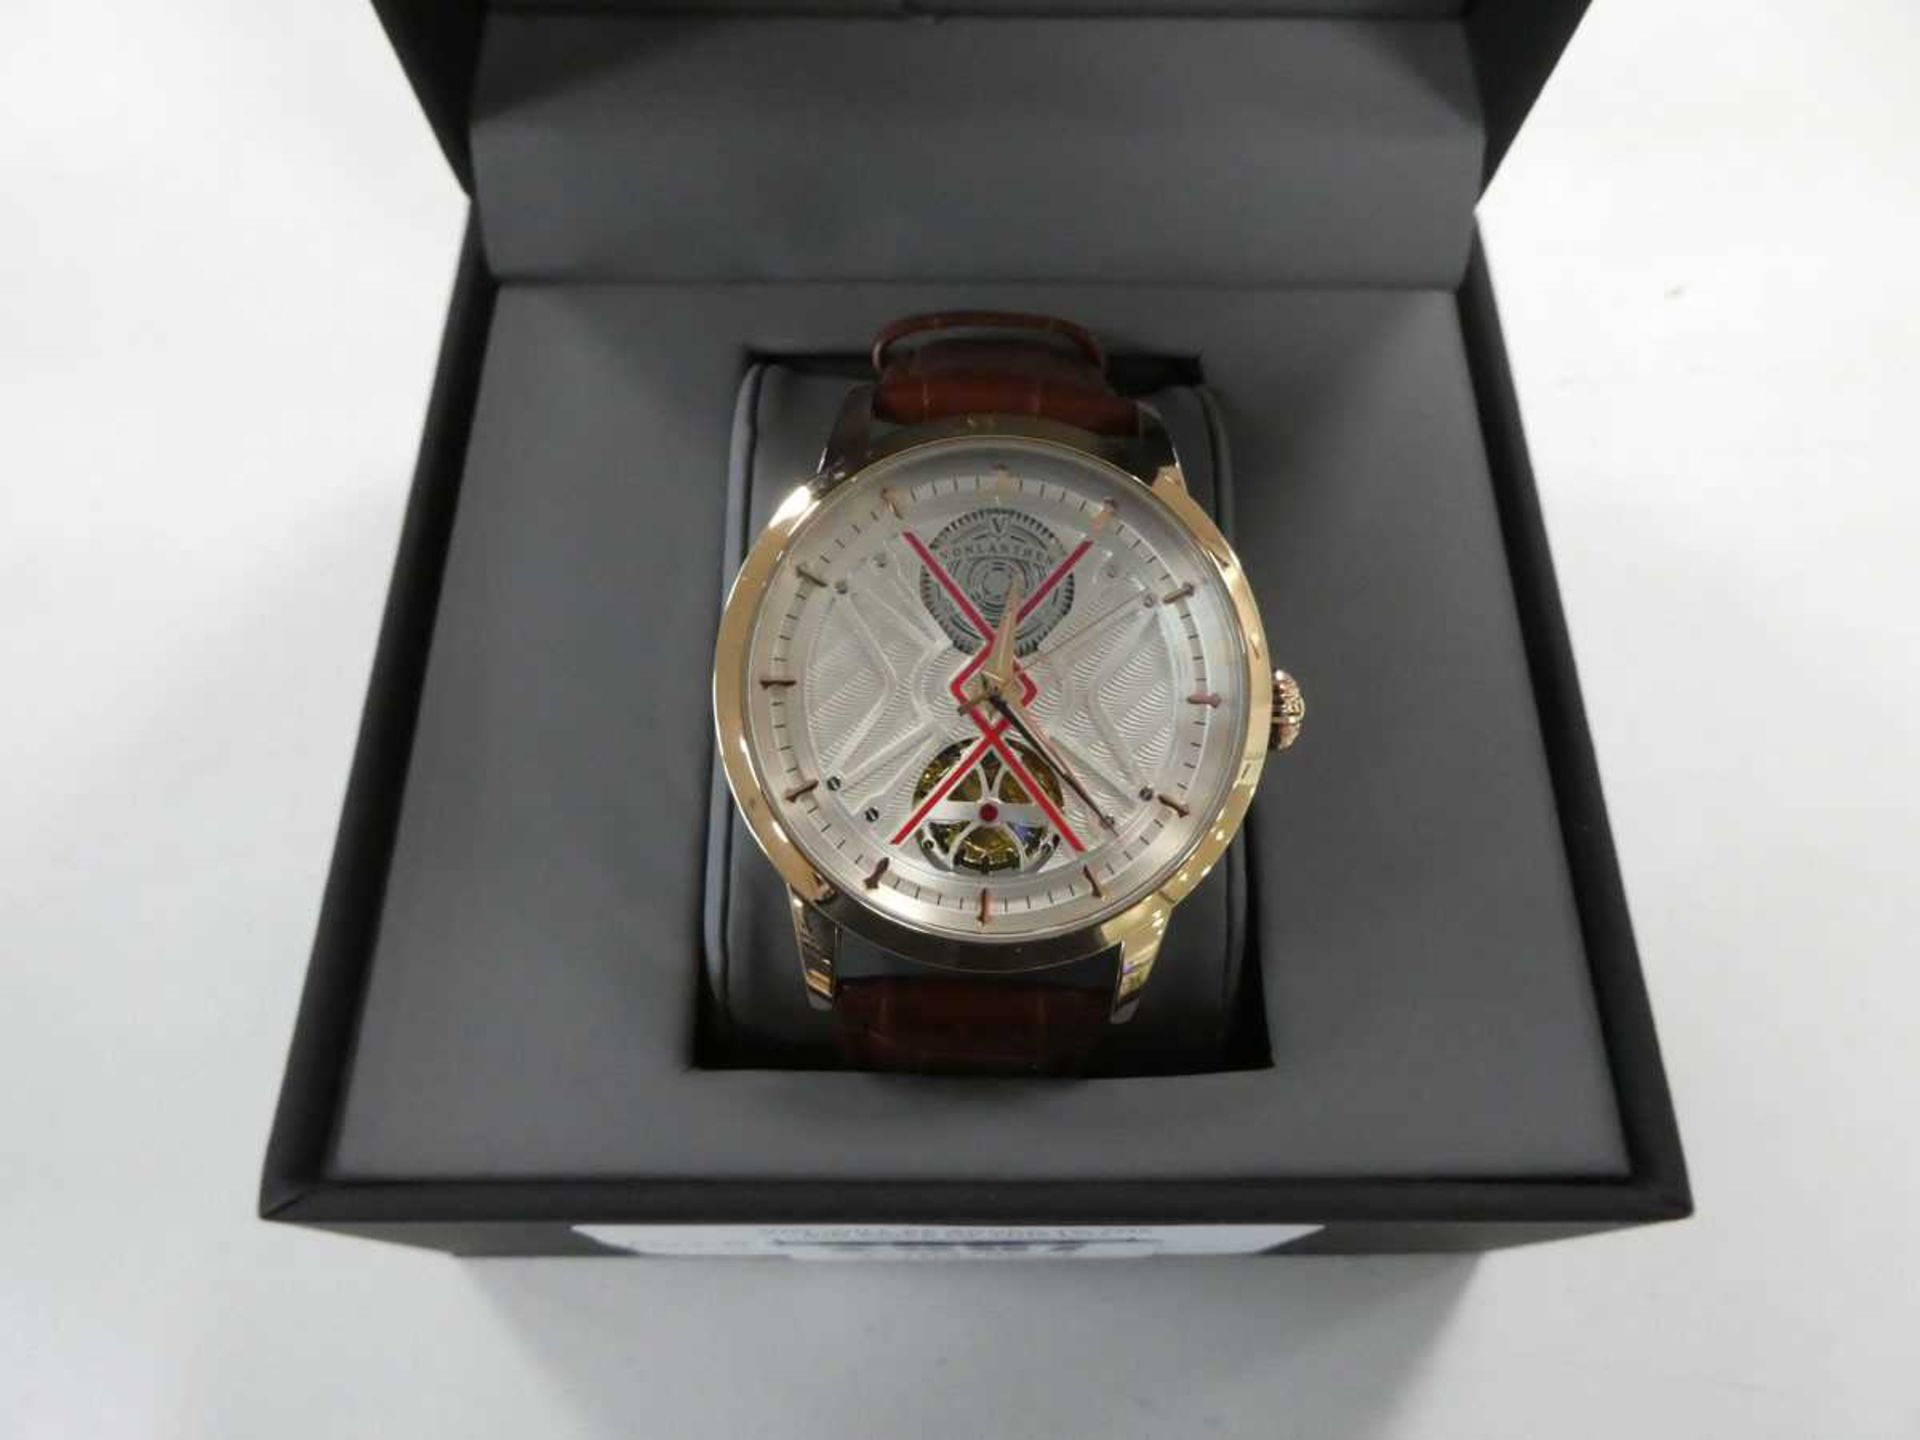 +VAT Boxed Vonlanthen men's automatic wristwatch with white dial and brown leather strap - Image 2 of 2